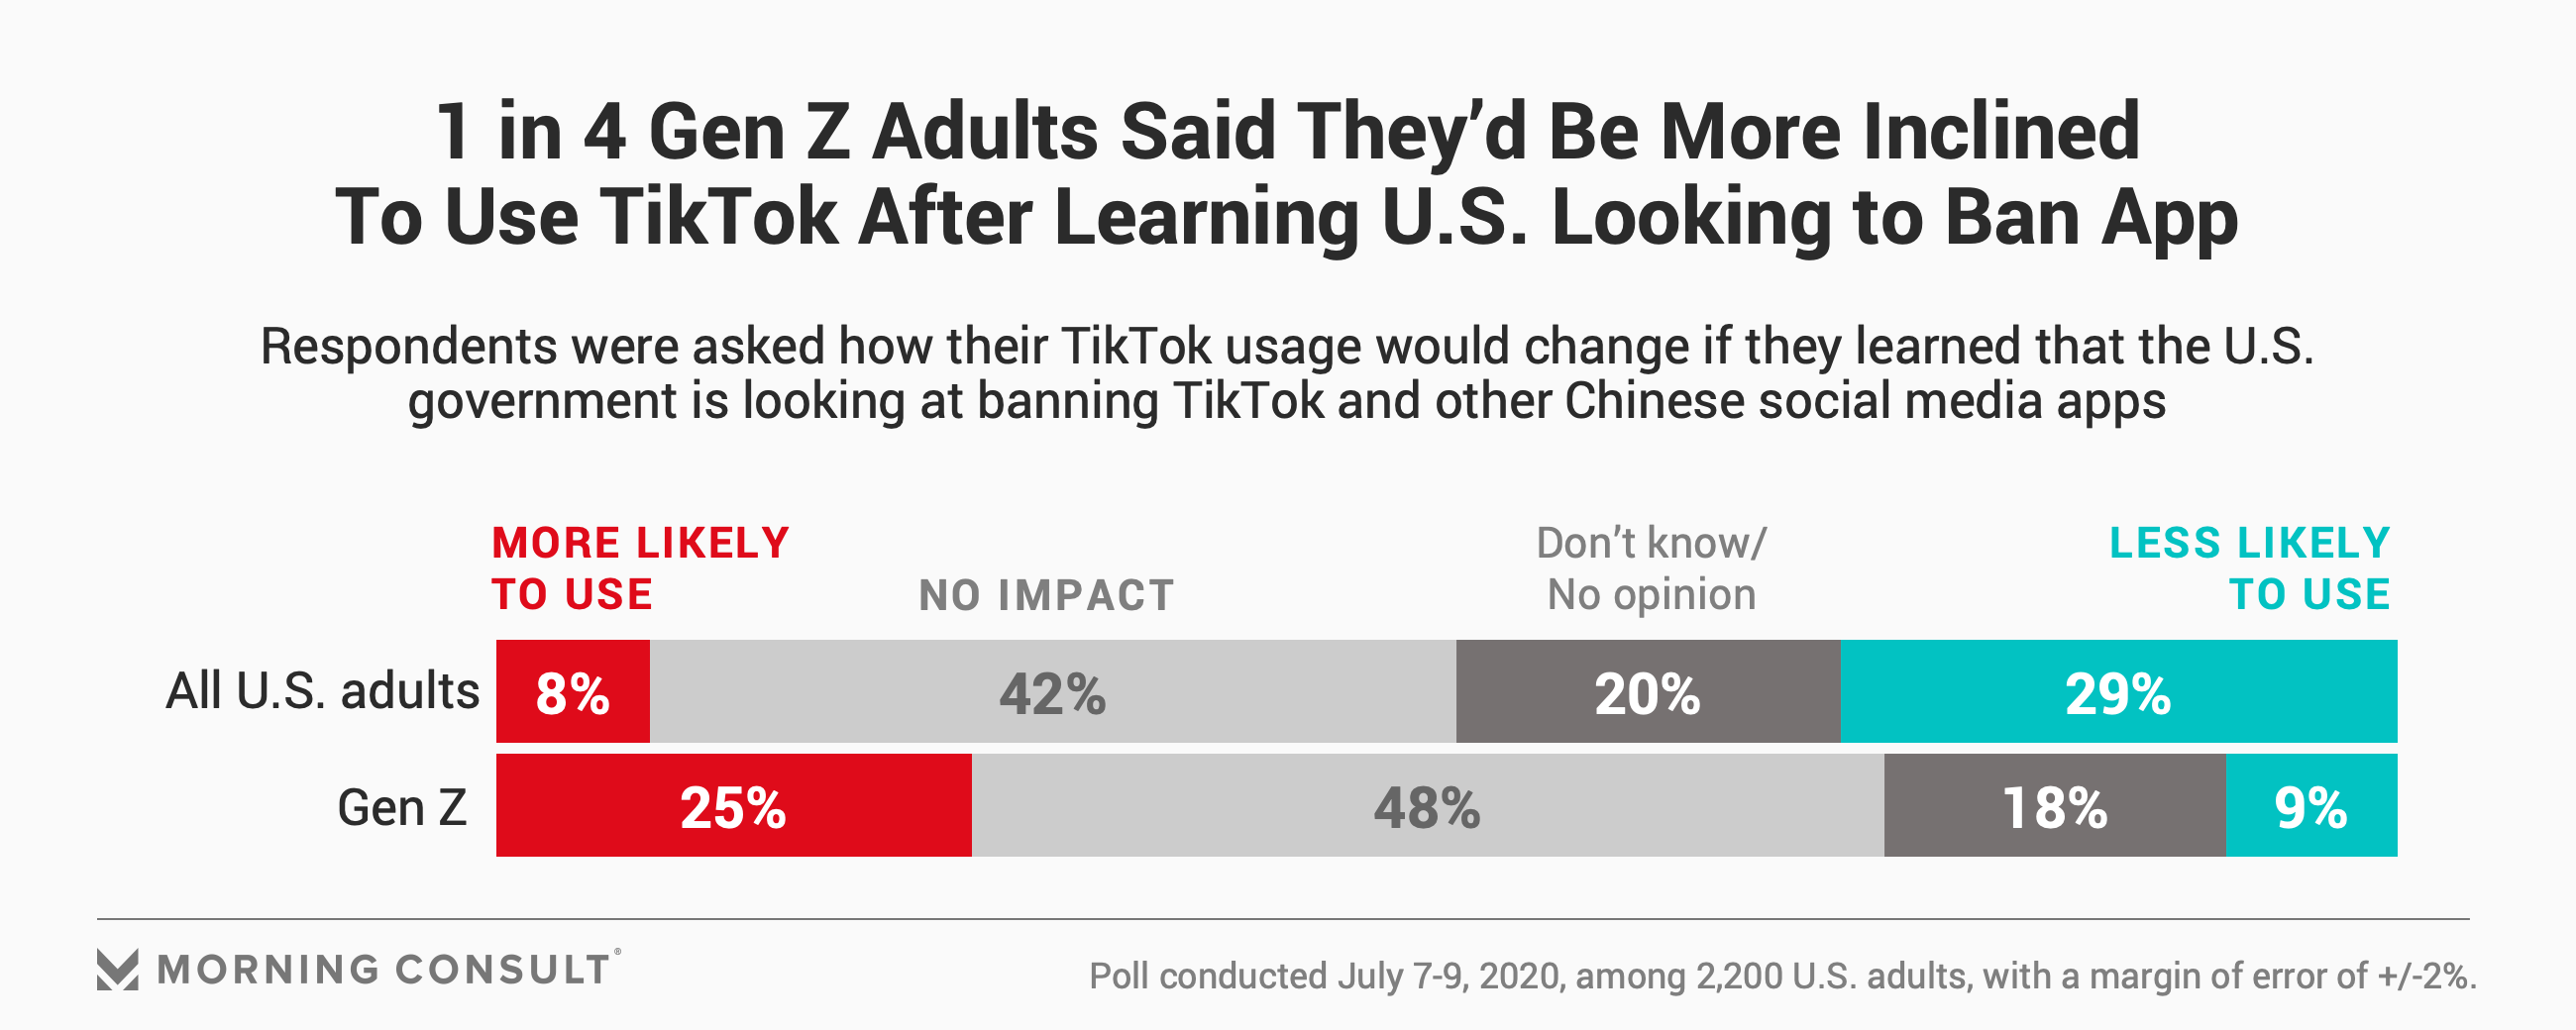 Public Divided on TikTok Ban as U.S. Considers Clampdown on Chinese